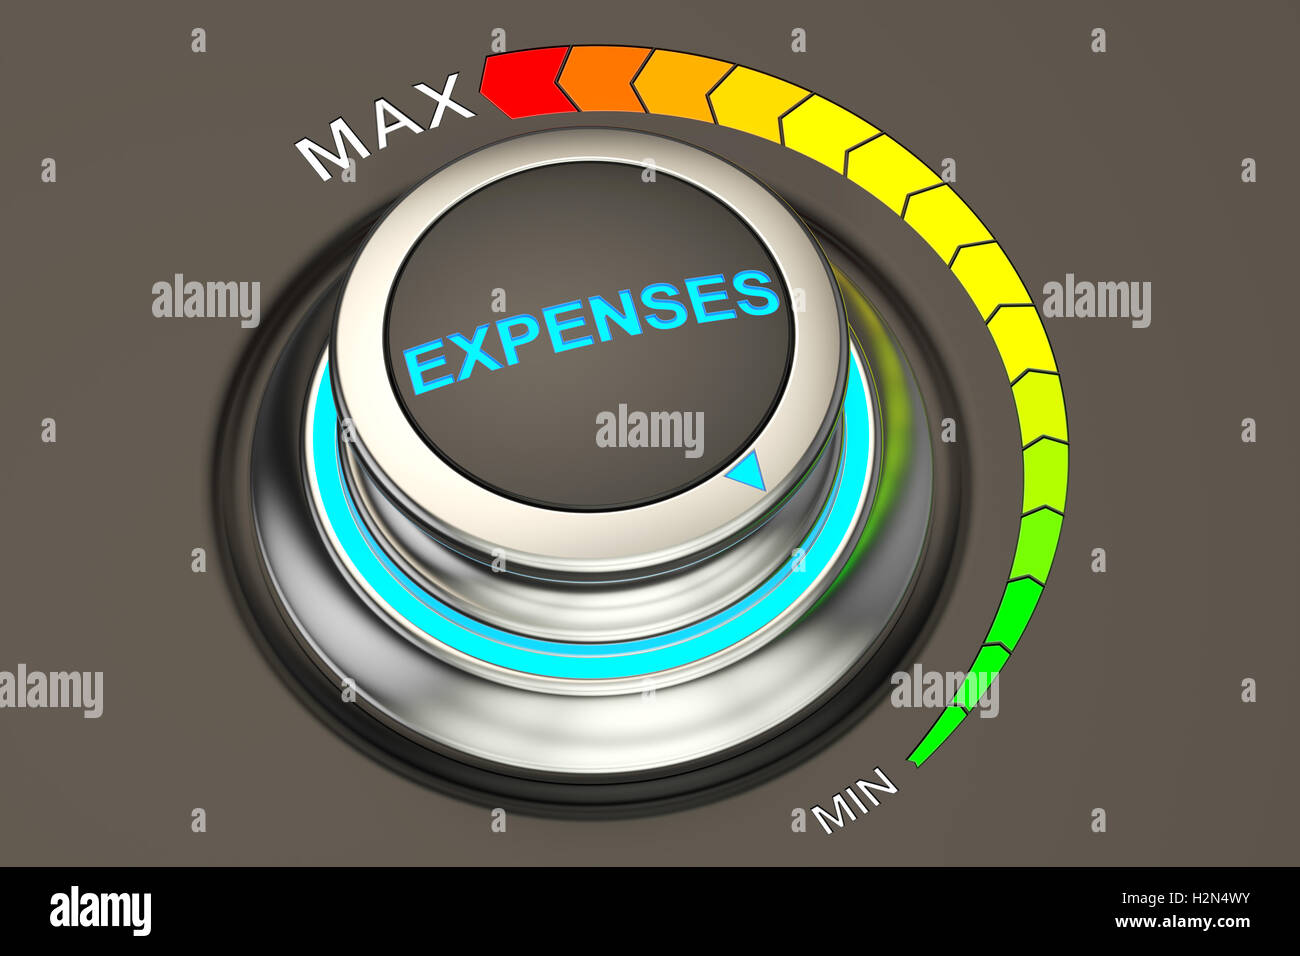 Lowest level of expenses concept, 3D rendering Stock Photo